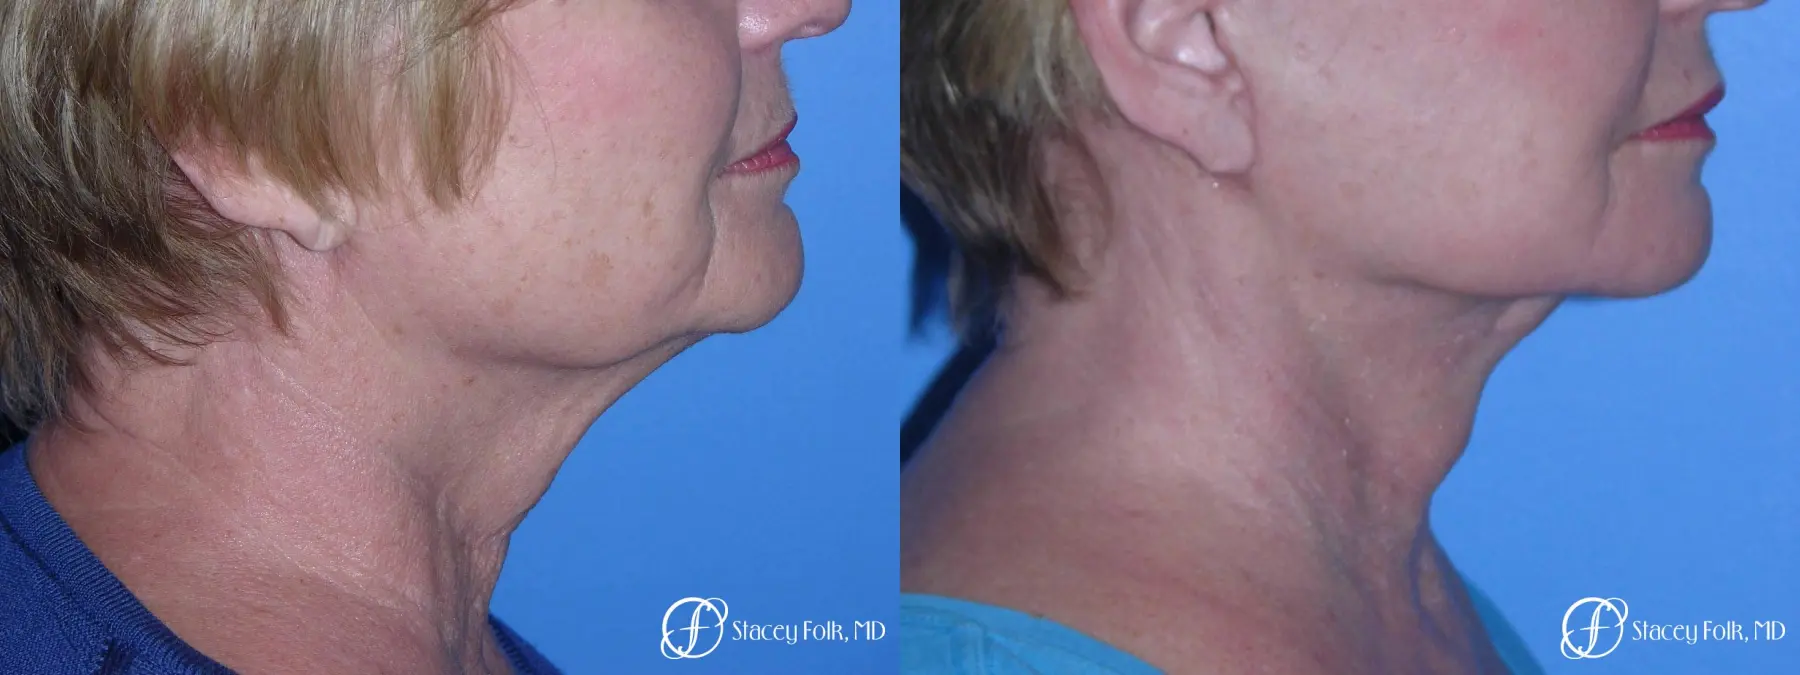 Denver Facial Rejuvenation Face Lift, Fat Injections, and Laser Resurfacing 7120 - Before and After